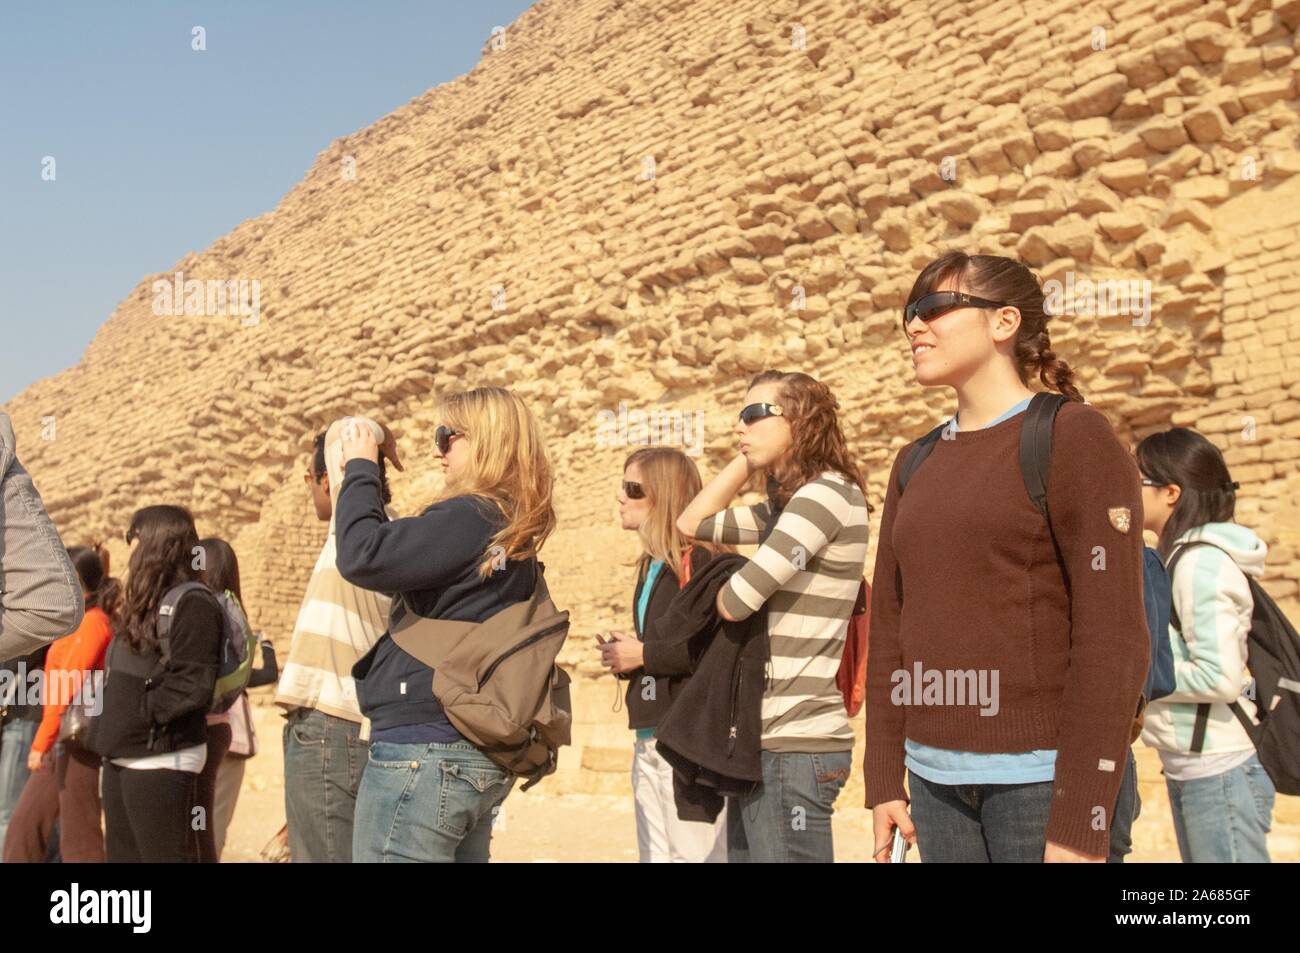 A group of students from the Johns Hopkins University in Baltimore, Maryland, outside on a sunny day, standing in front of a pyramid, Giza, Egypt during a study abroad program, January 6, 2008. From the Homewood Photography Collection. () Stock Photo